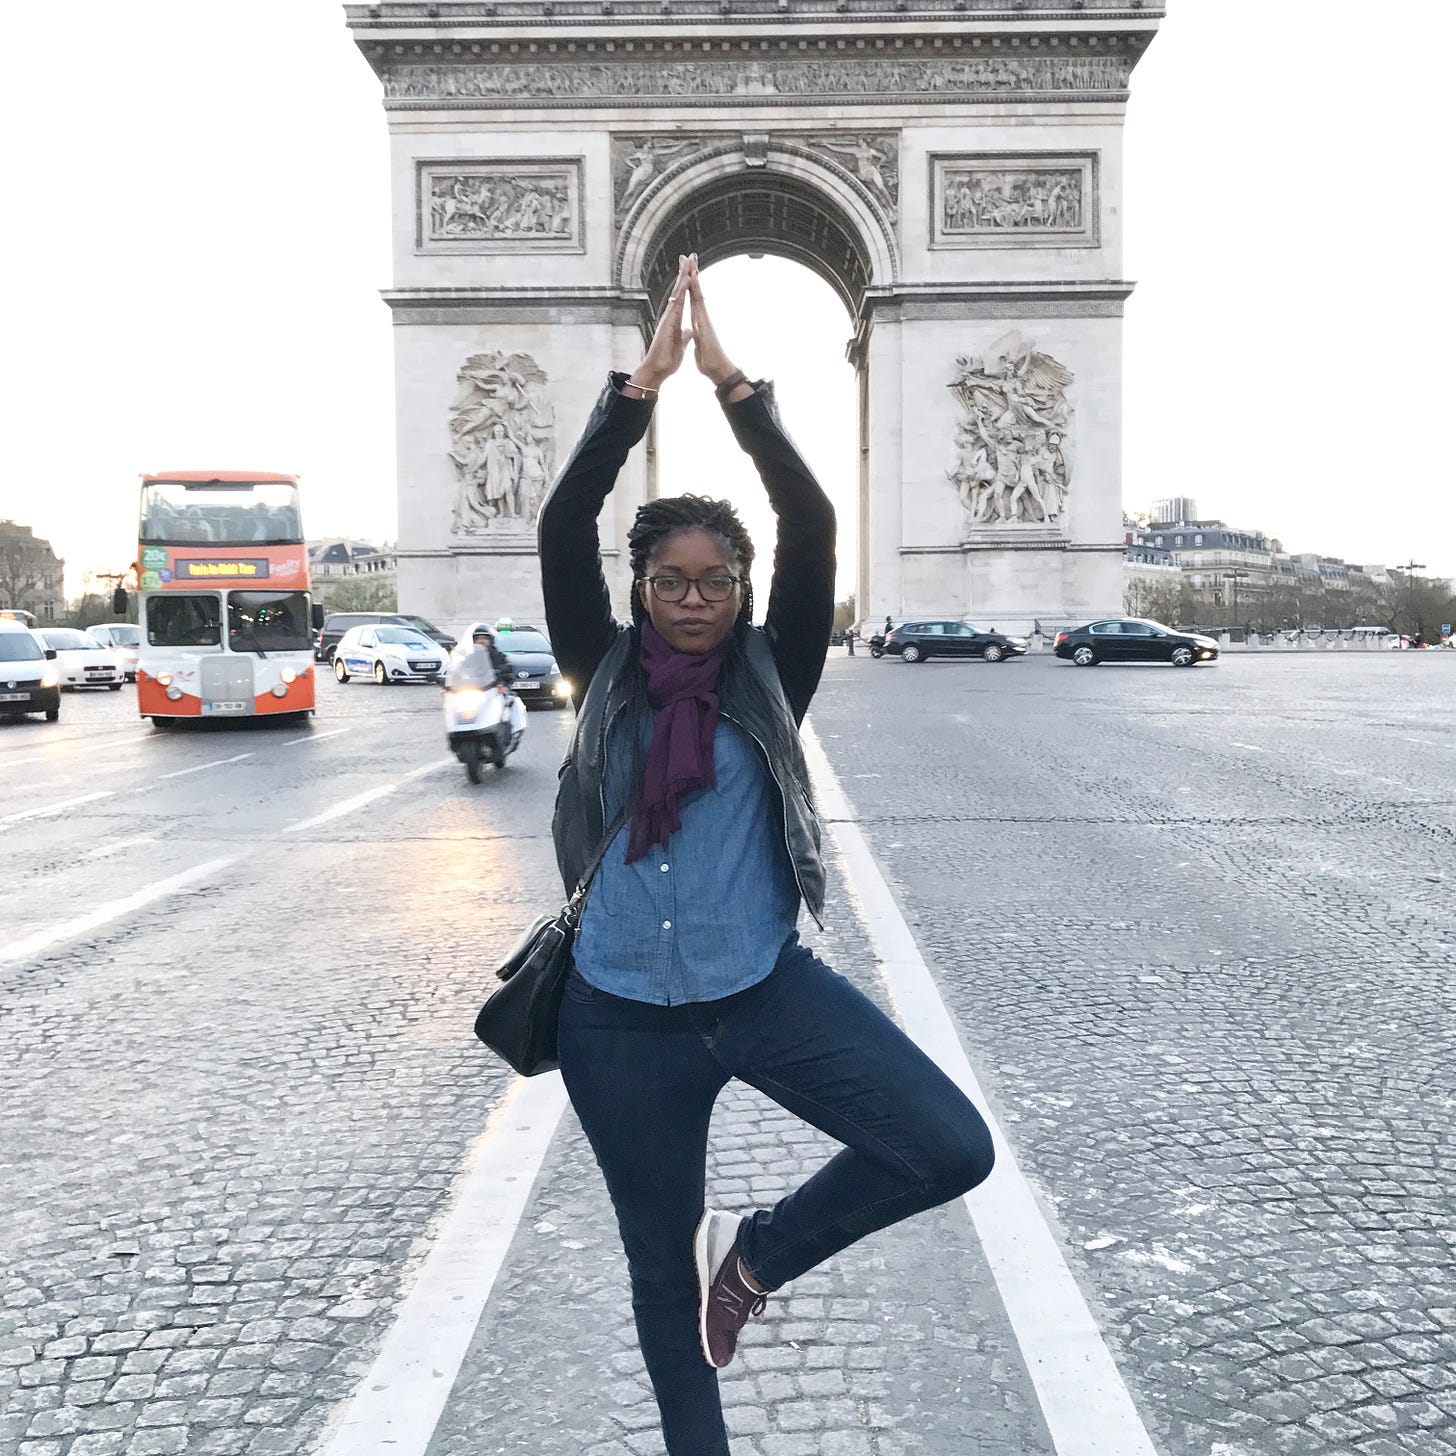 A Black woman standing in front of the Arc de Triomphe in Paris doing tree pose.